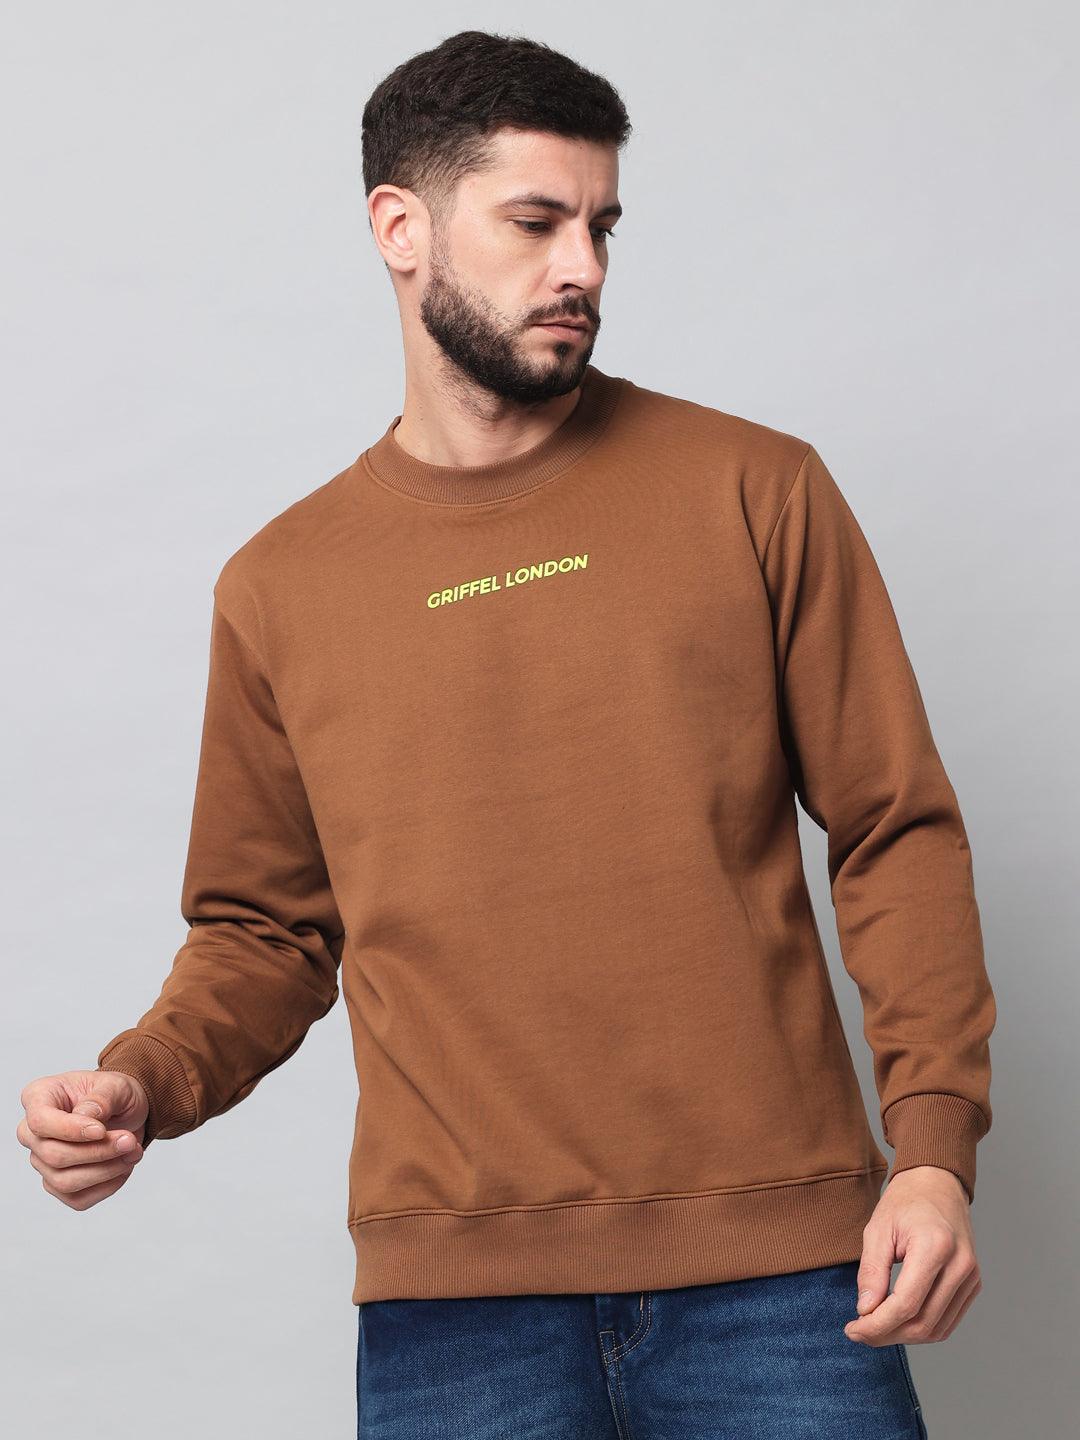 Griffel Men's Cotton Fleece Round Neck Brown Sweatshirt with Full Sleeve and Front Logo Print - griffel